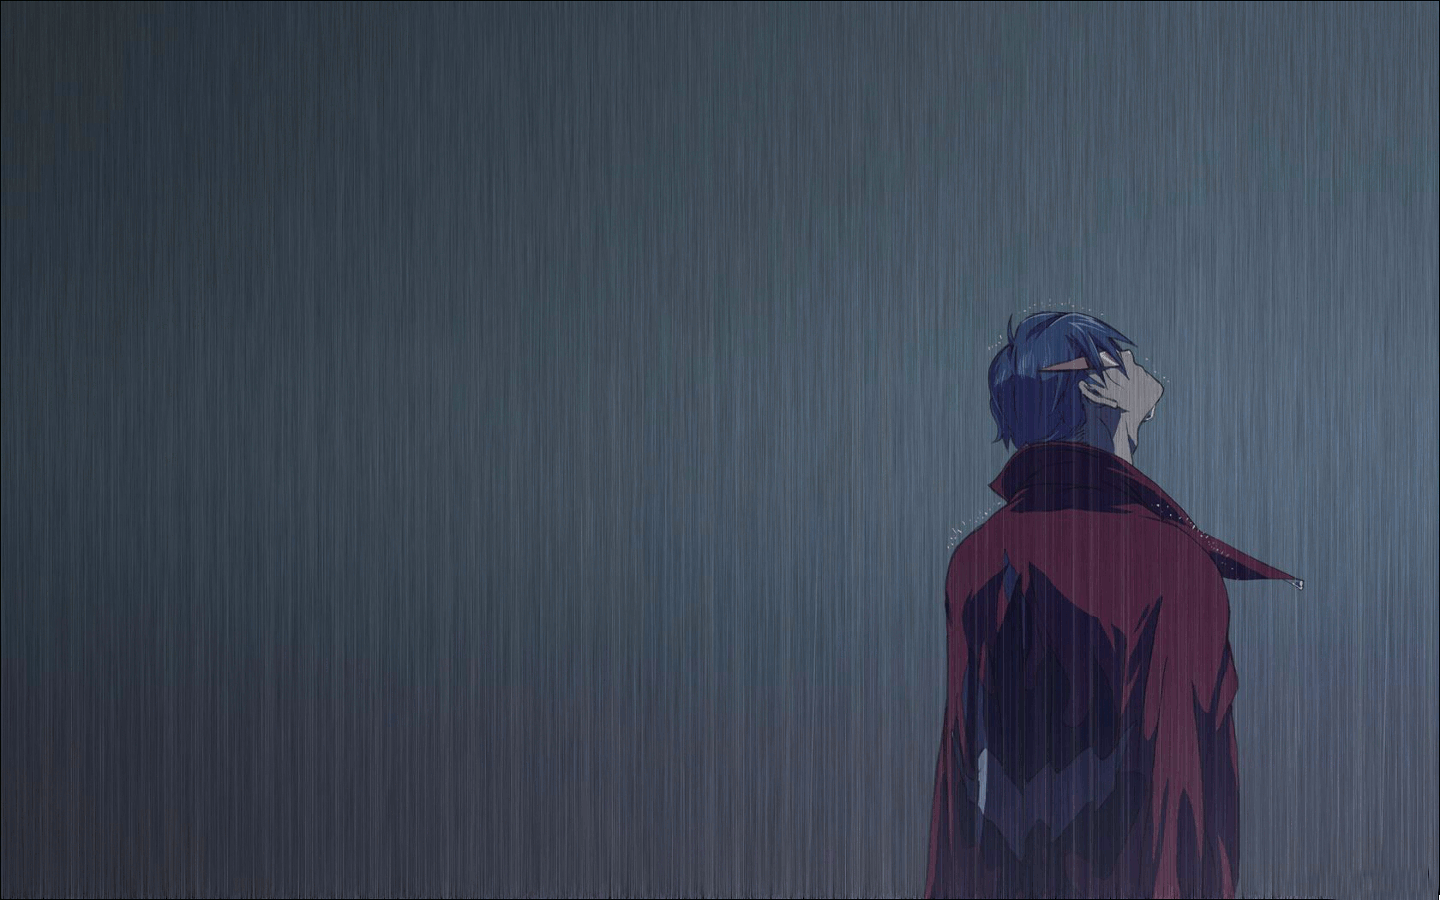 HD wallpaper: Boy, Anime, Lonely, one person, clothing, copy space, young  adult